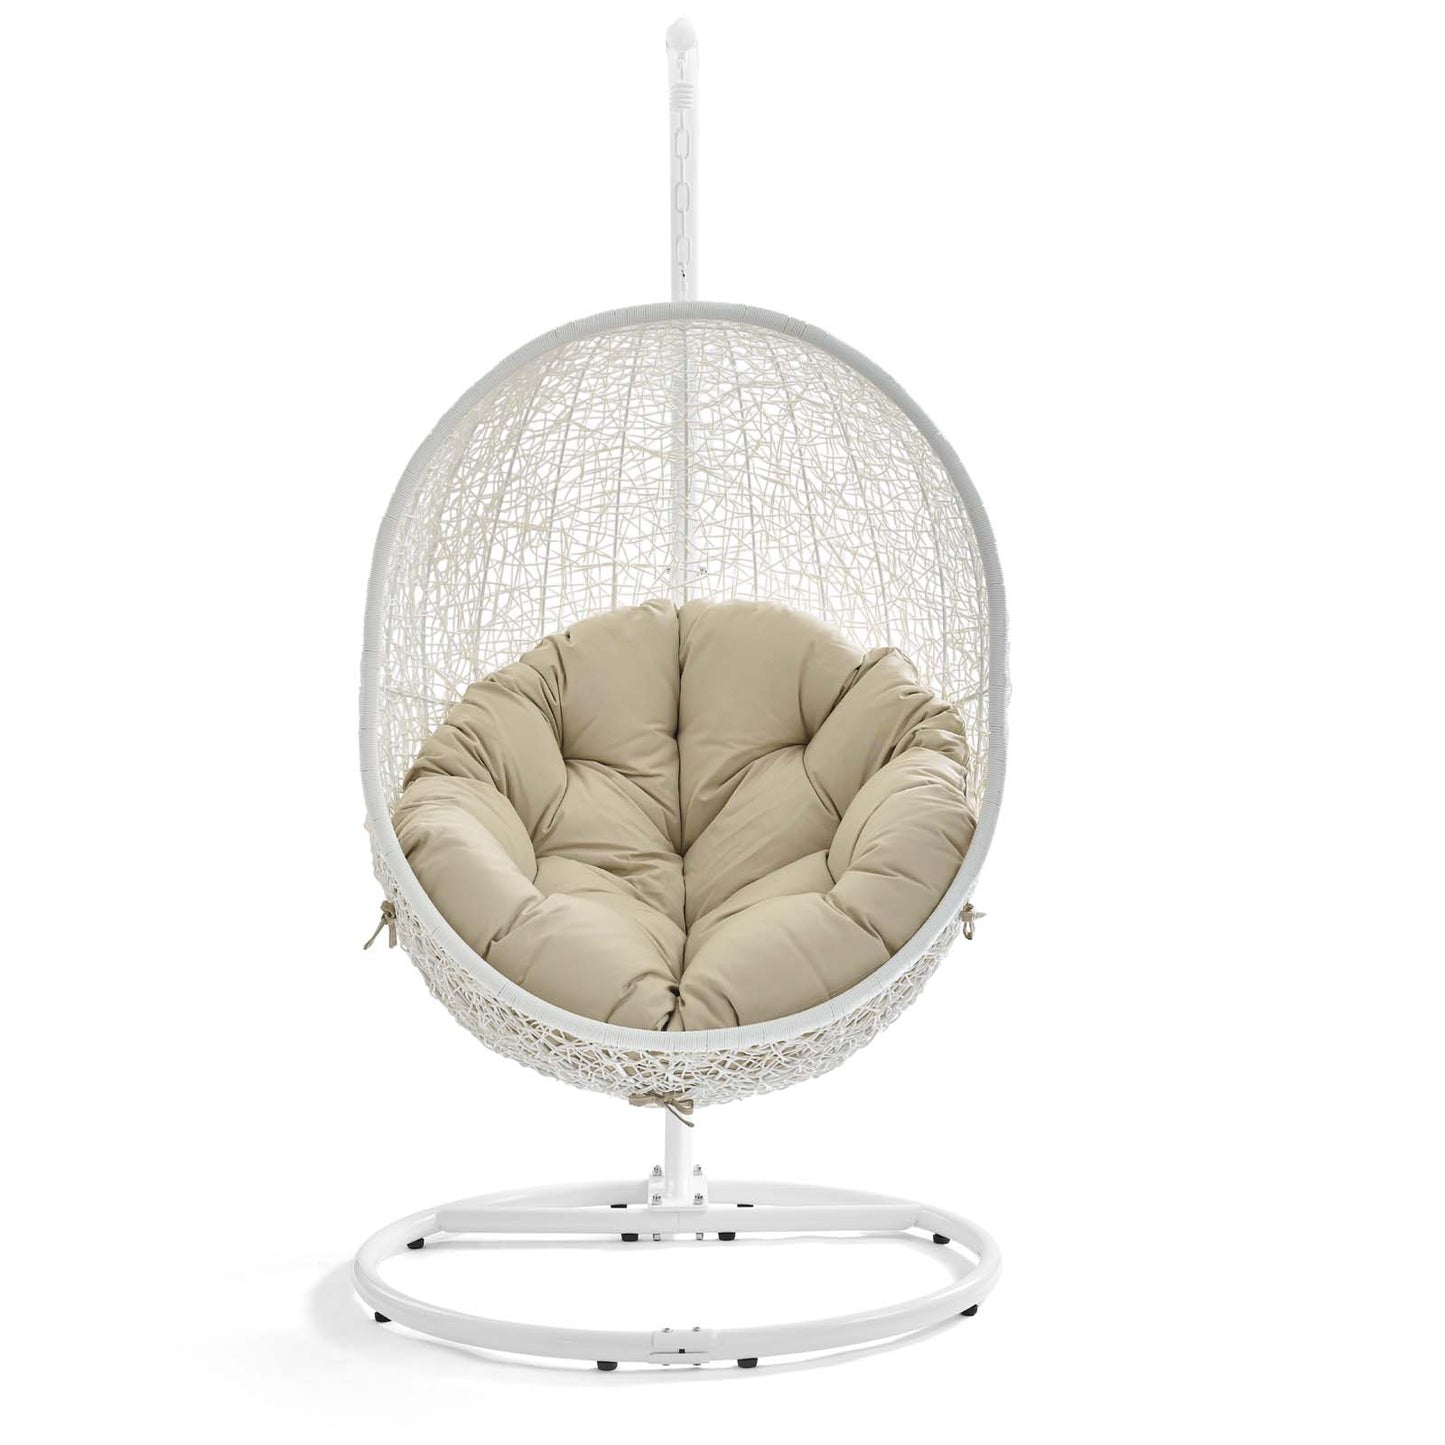 Hide Outdoor Patio Sunbrella® Swing Chair With Stand White Beige EEI-3929-WHI-BEI